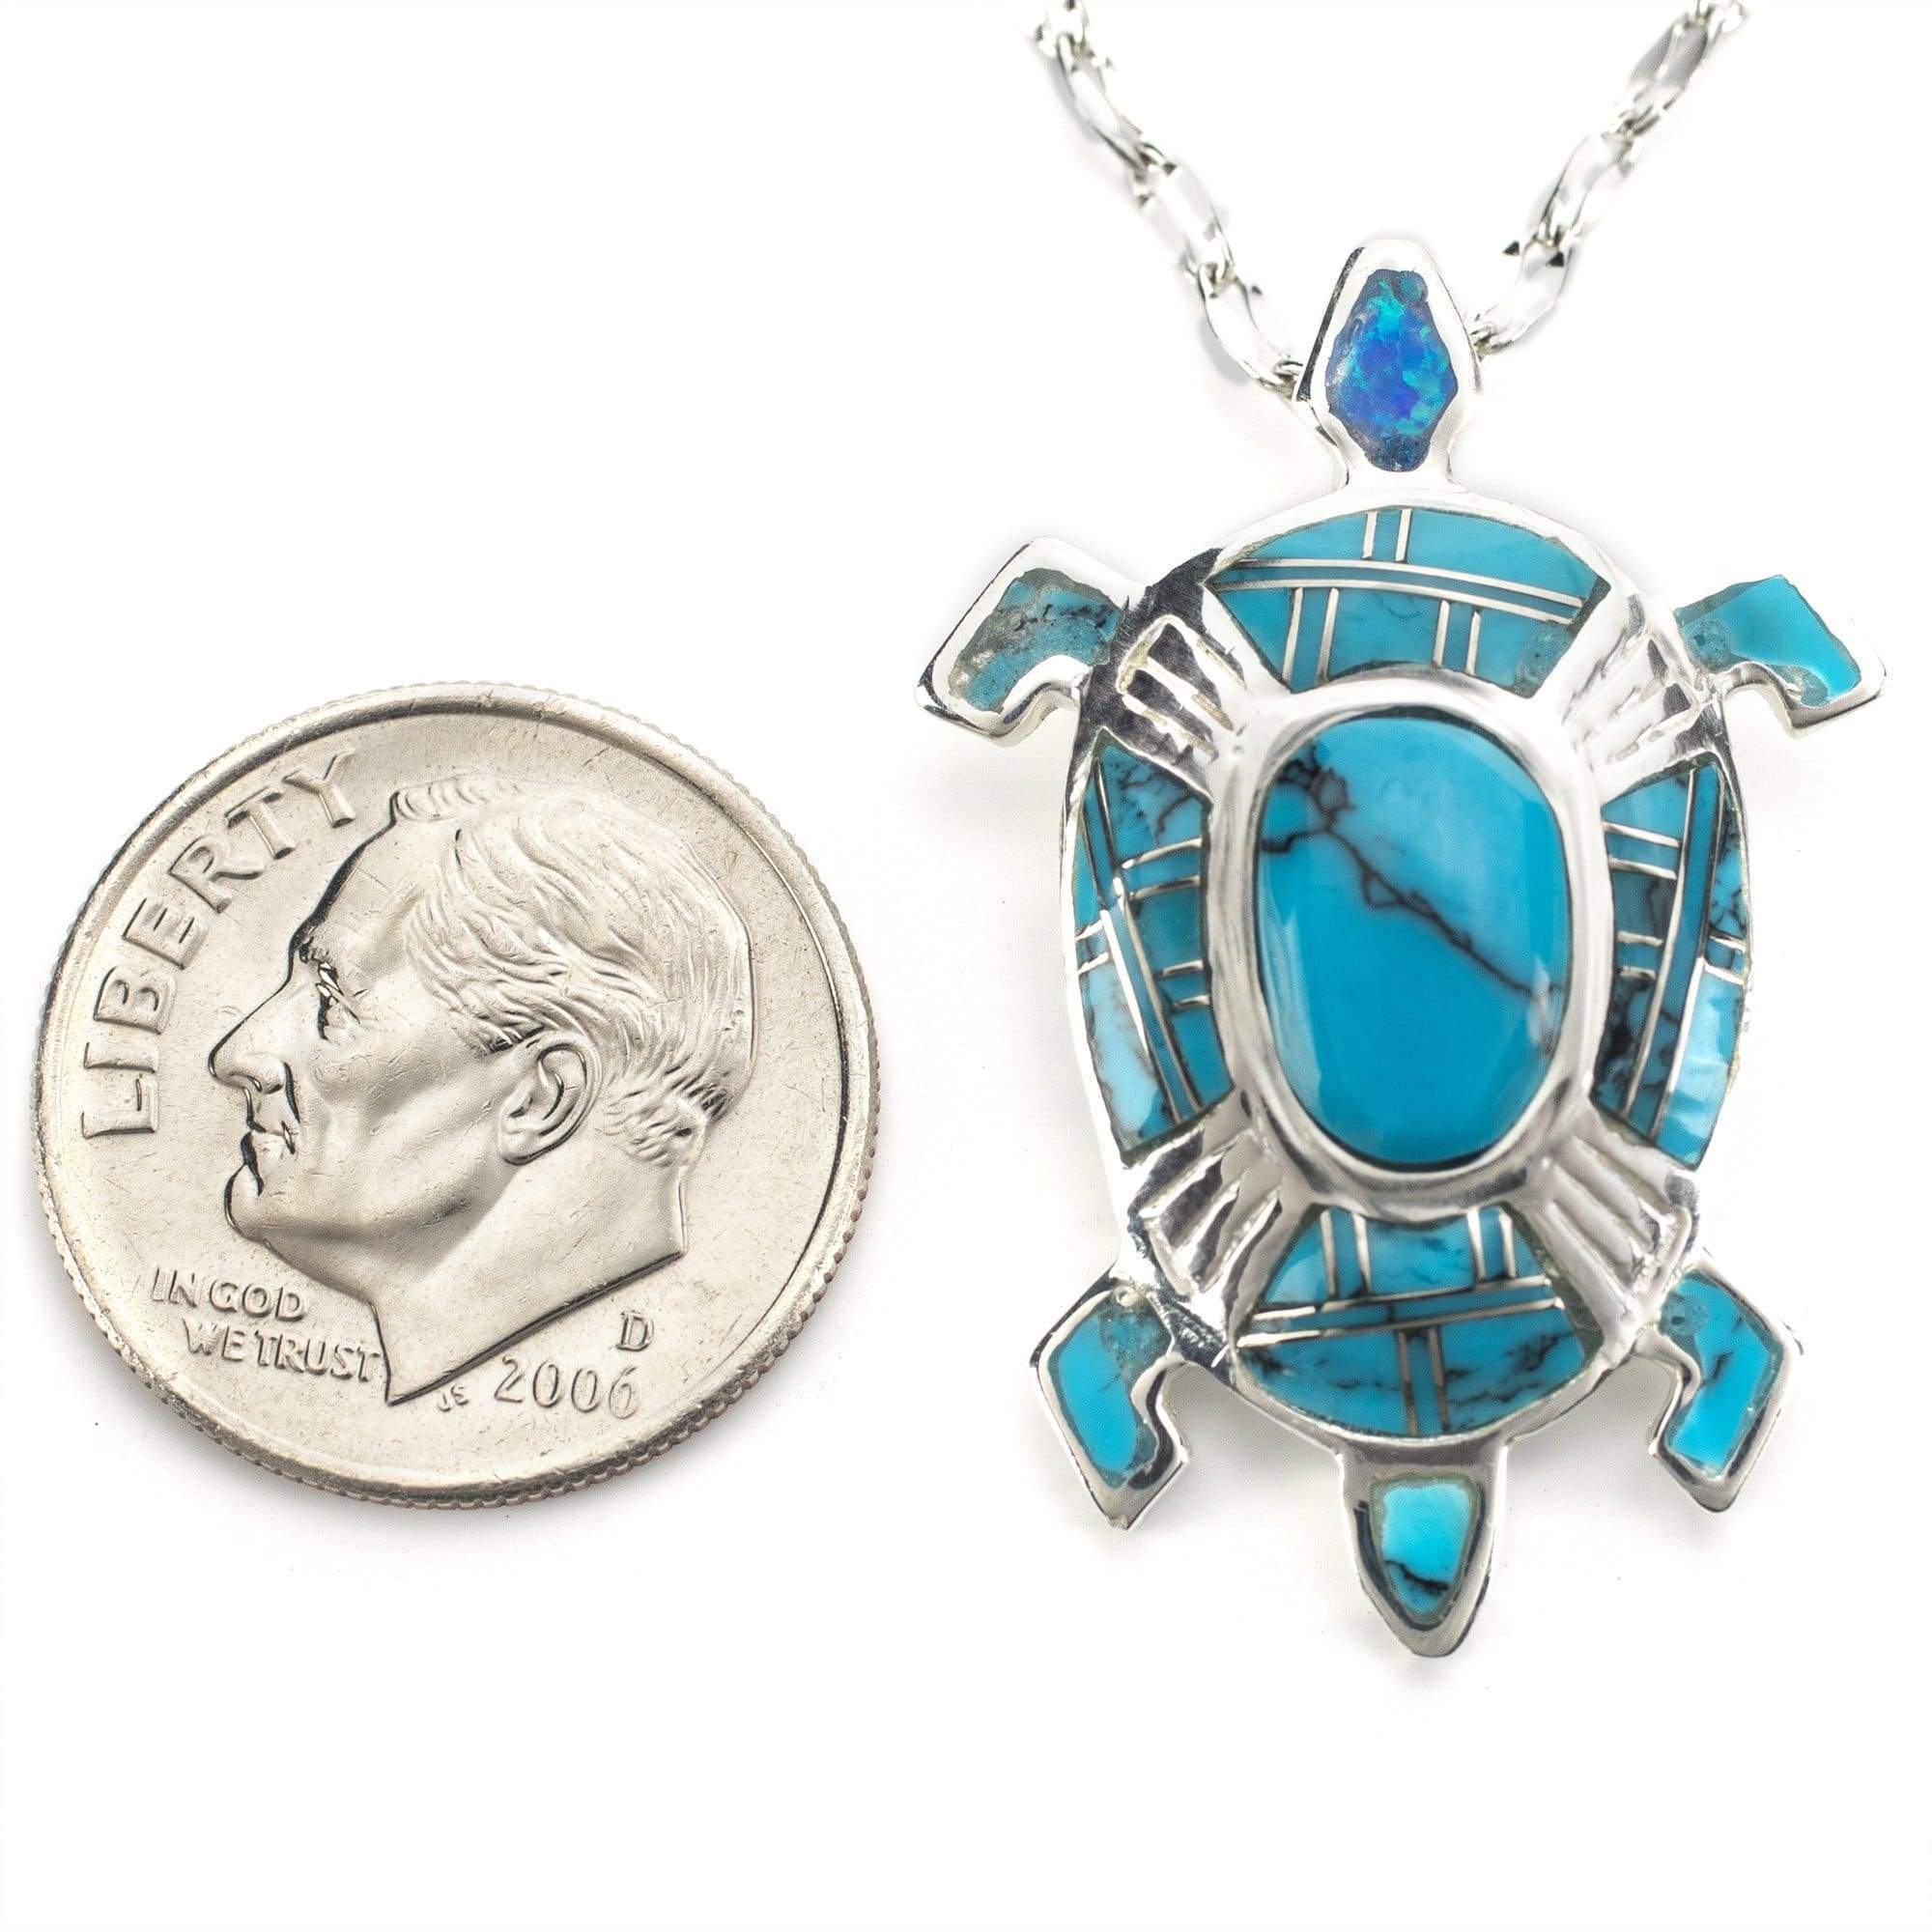 Kalifano Southwest Silver Jewelry Turquoise Turtle 925 Sterling Silver Pendant USA Handmade with Opal Accent NMN.0894.TQ